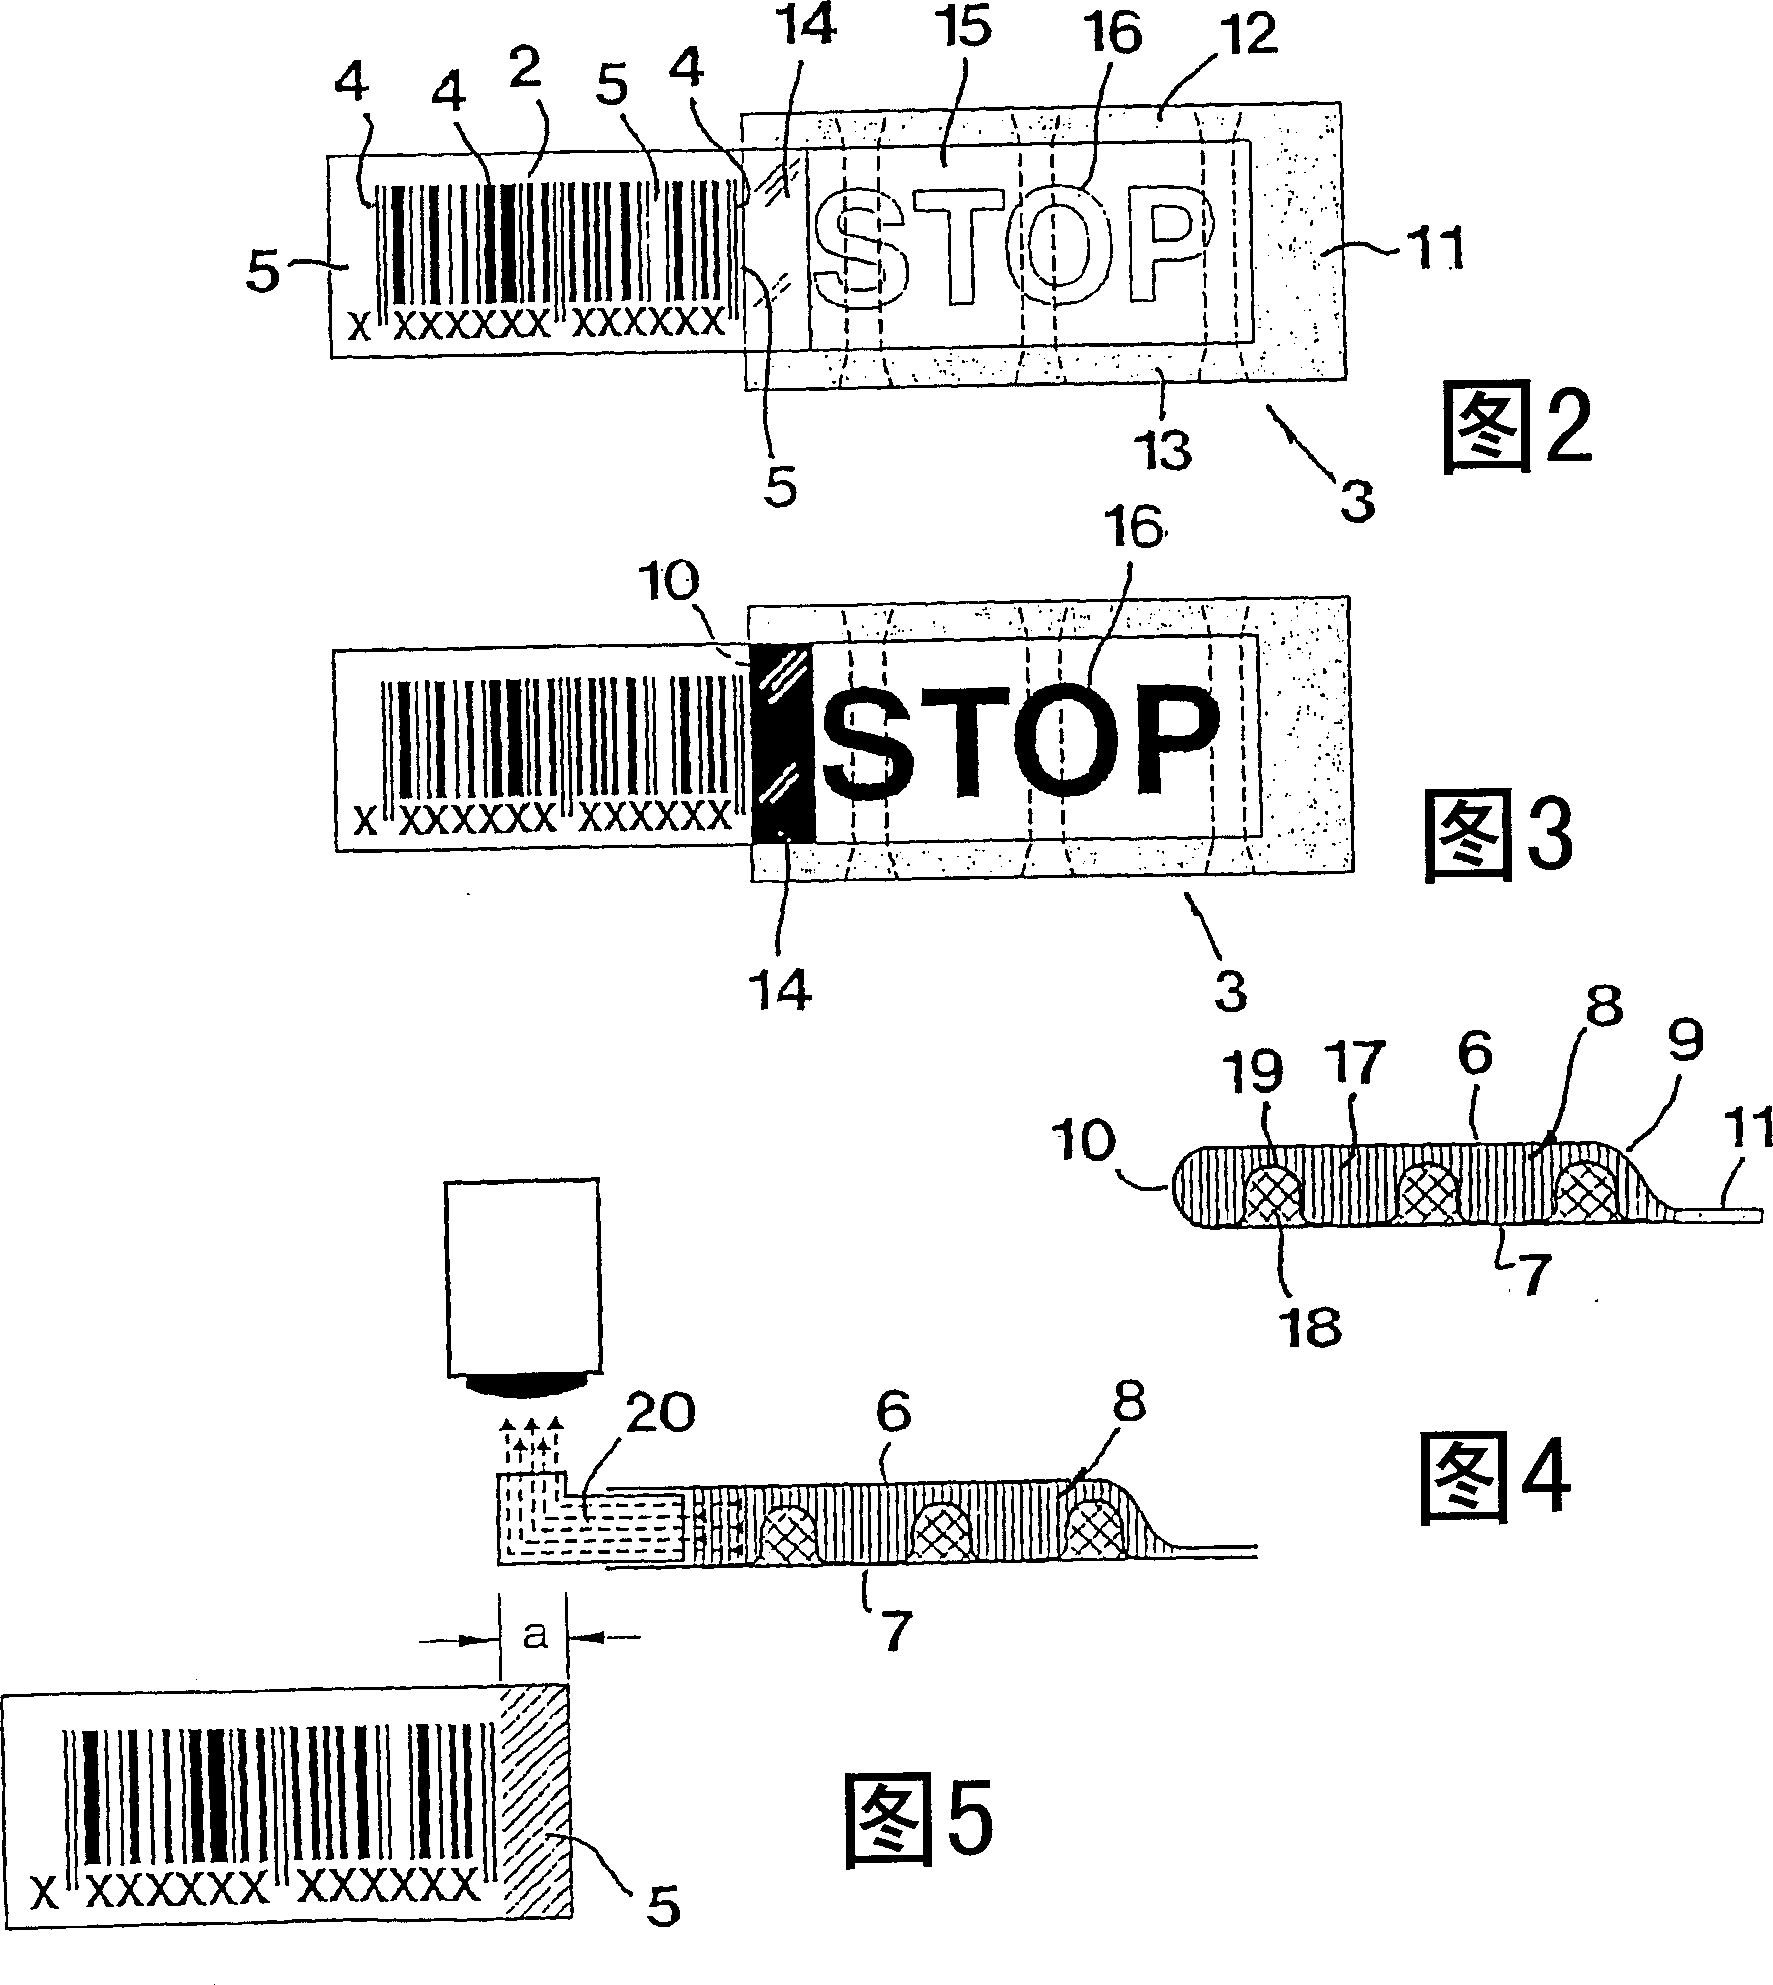 A package for storing goods in a preservative state as well as a method for making such a package